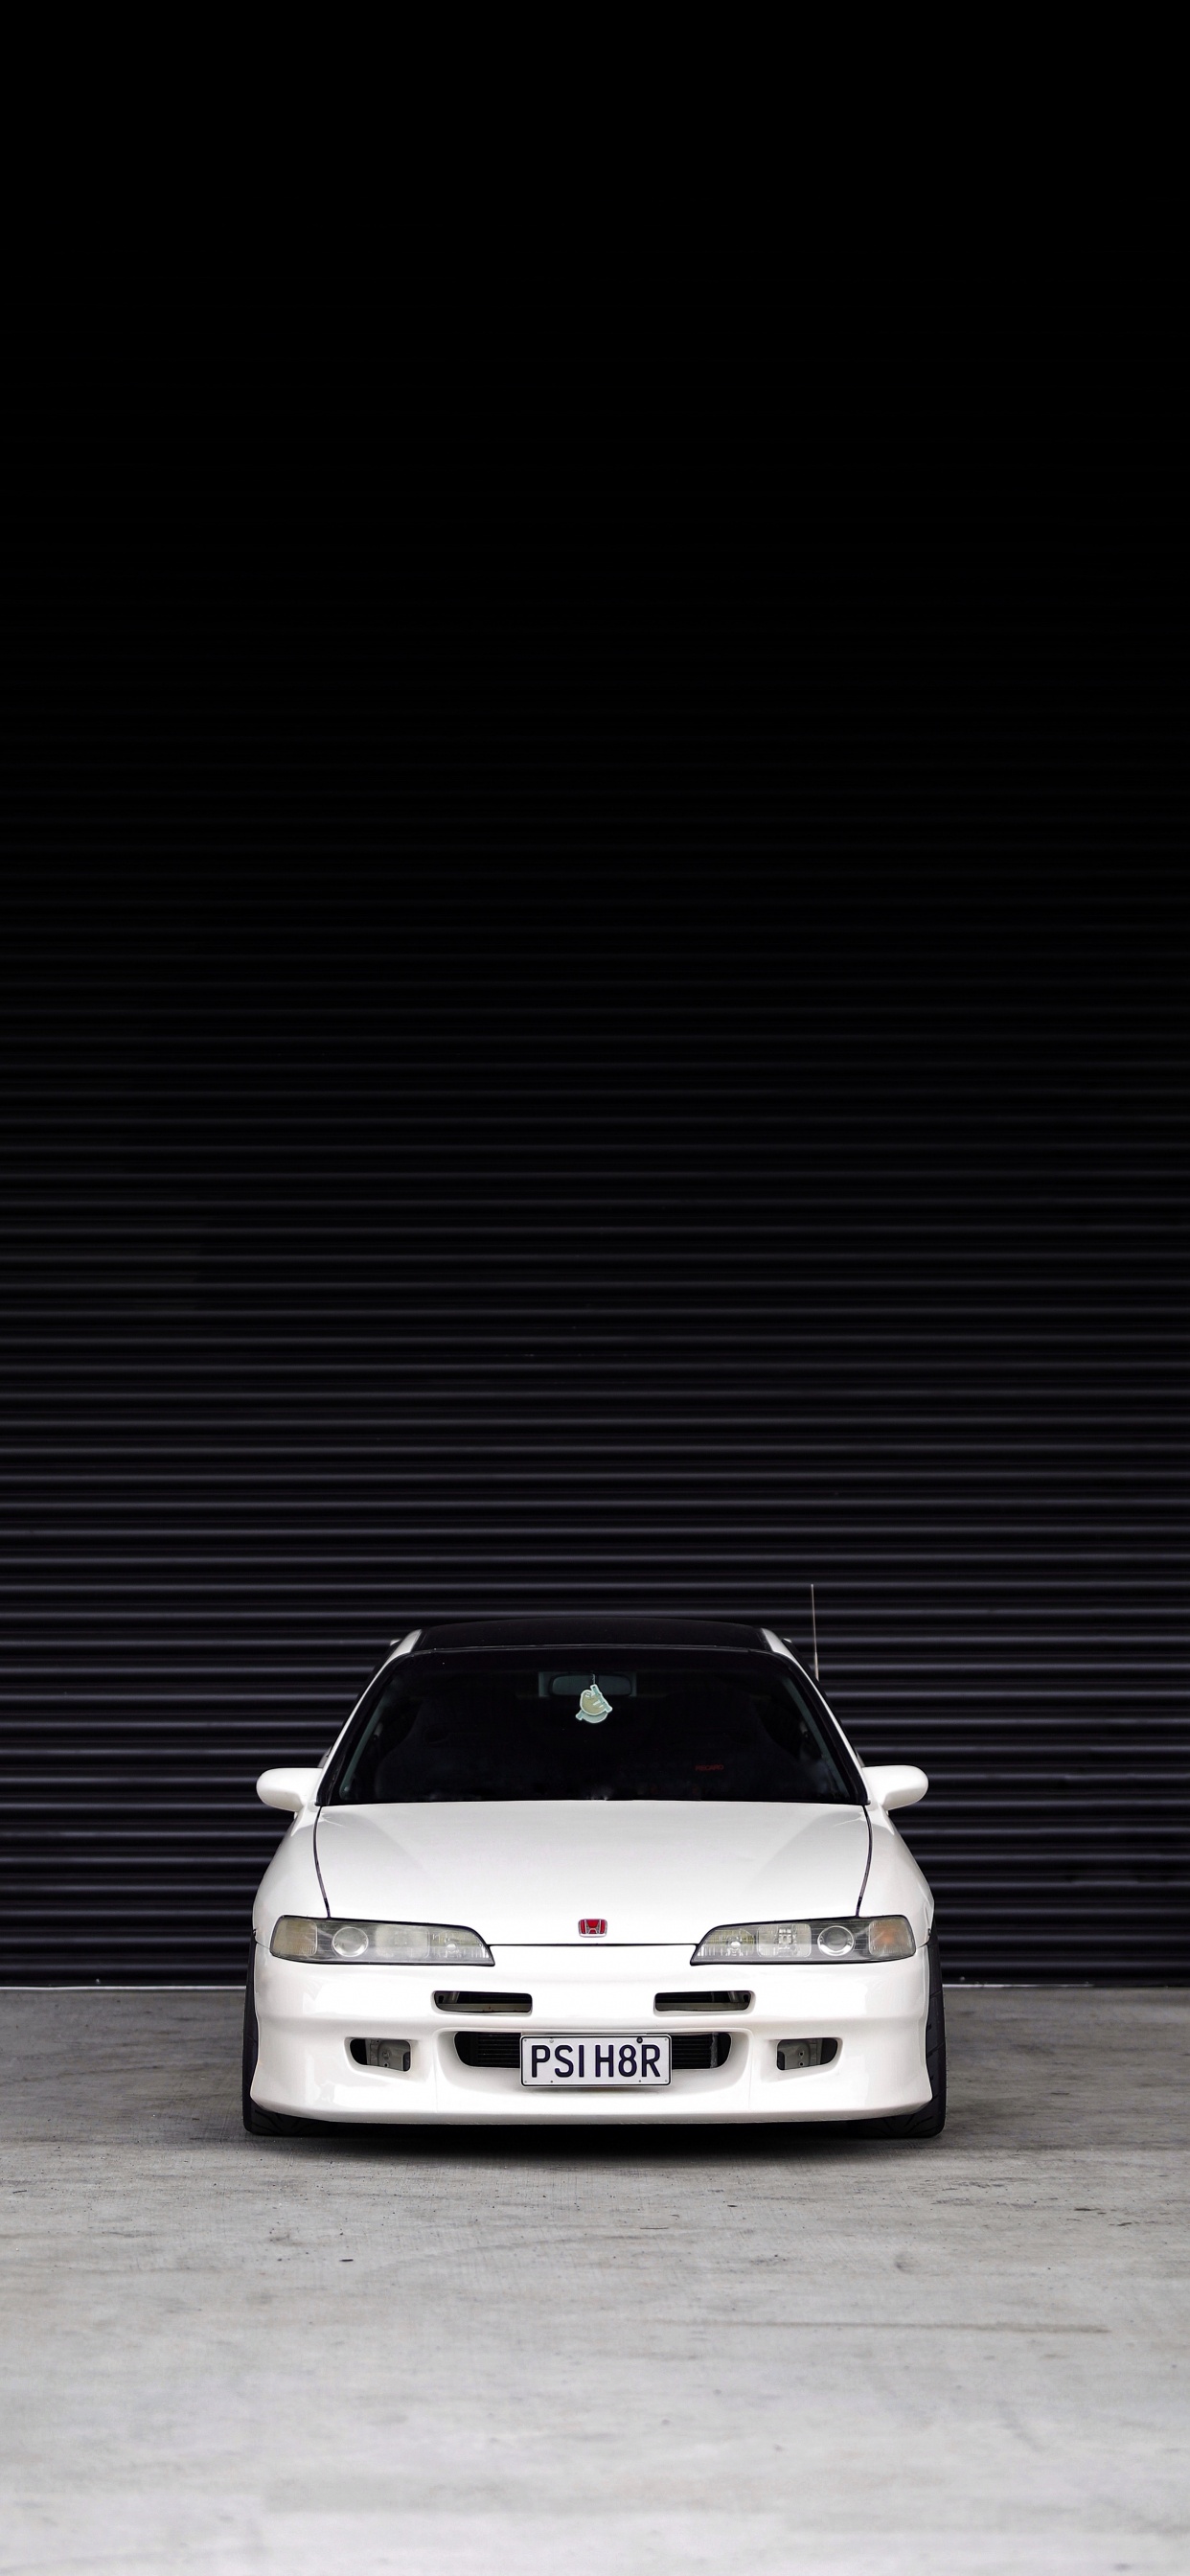 White Car in a White Room. Wallpaper in 1242x2688 Resolution